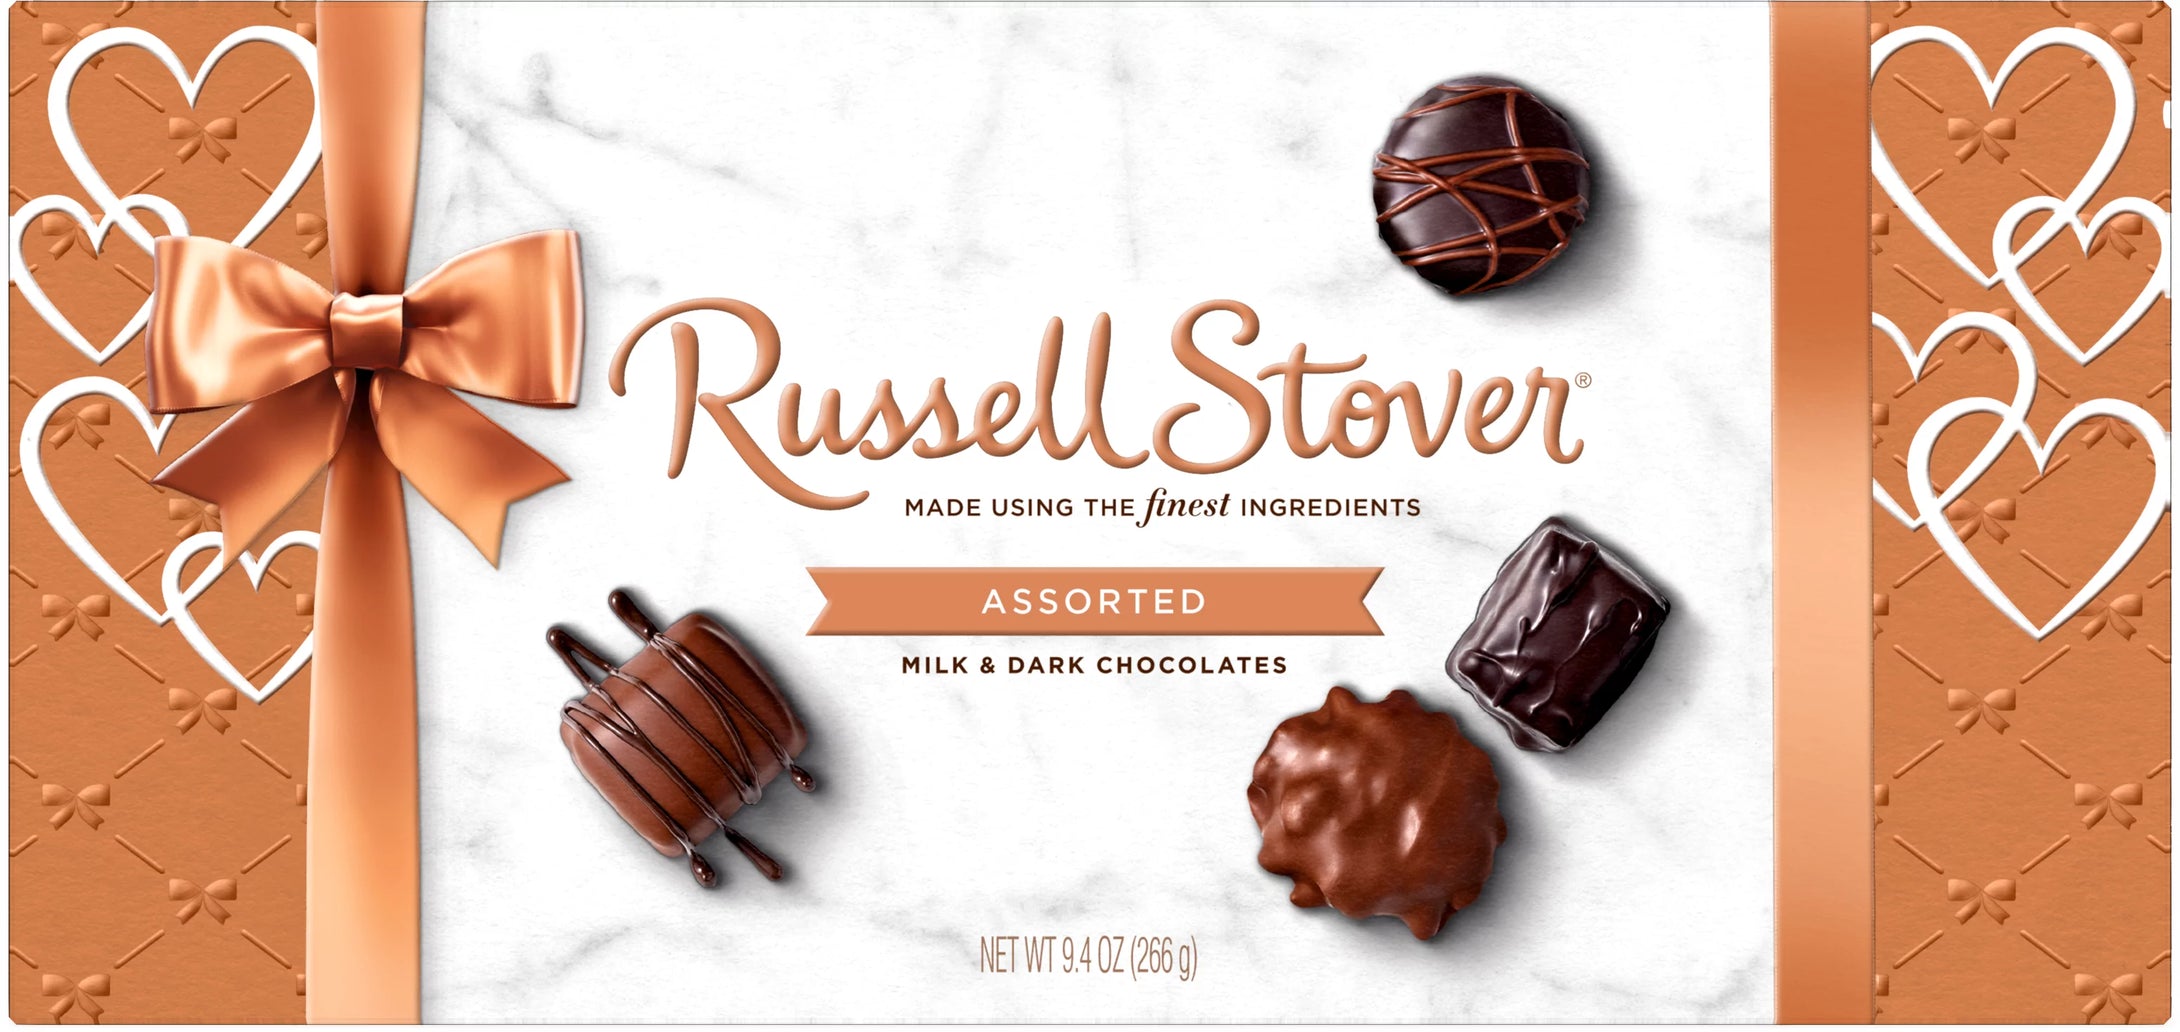 Russell Stover Valentine's Day Assorted Milk & Dark Chocolate Gift Box, 9.4 oz. (16 Pieces)